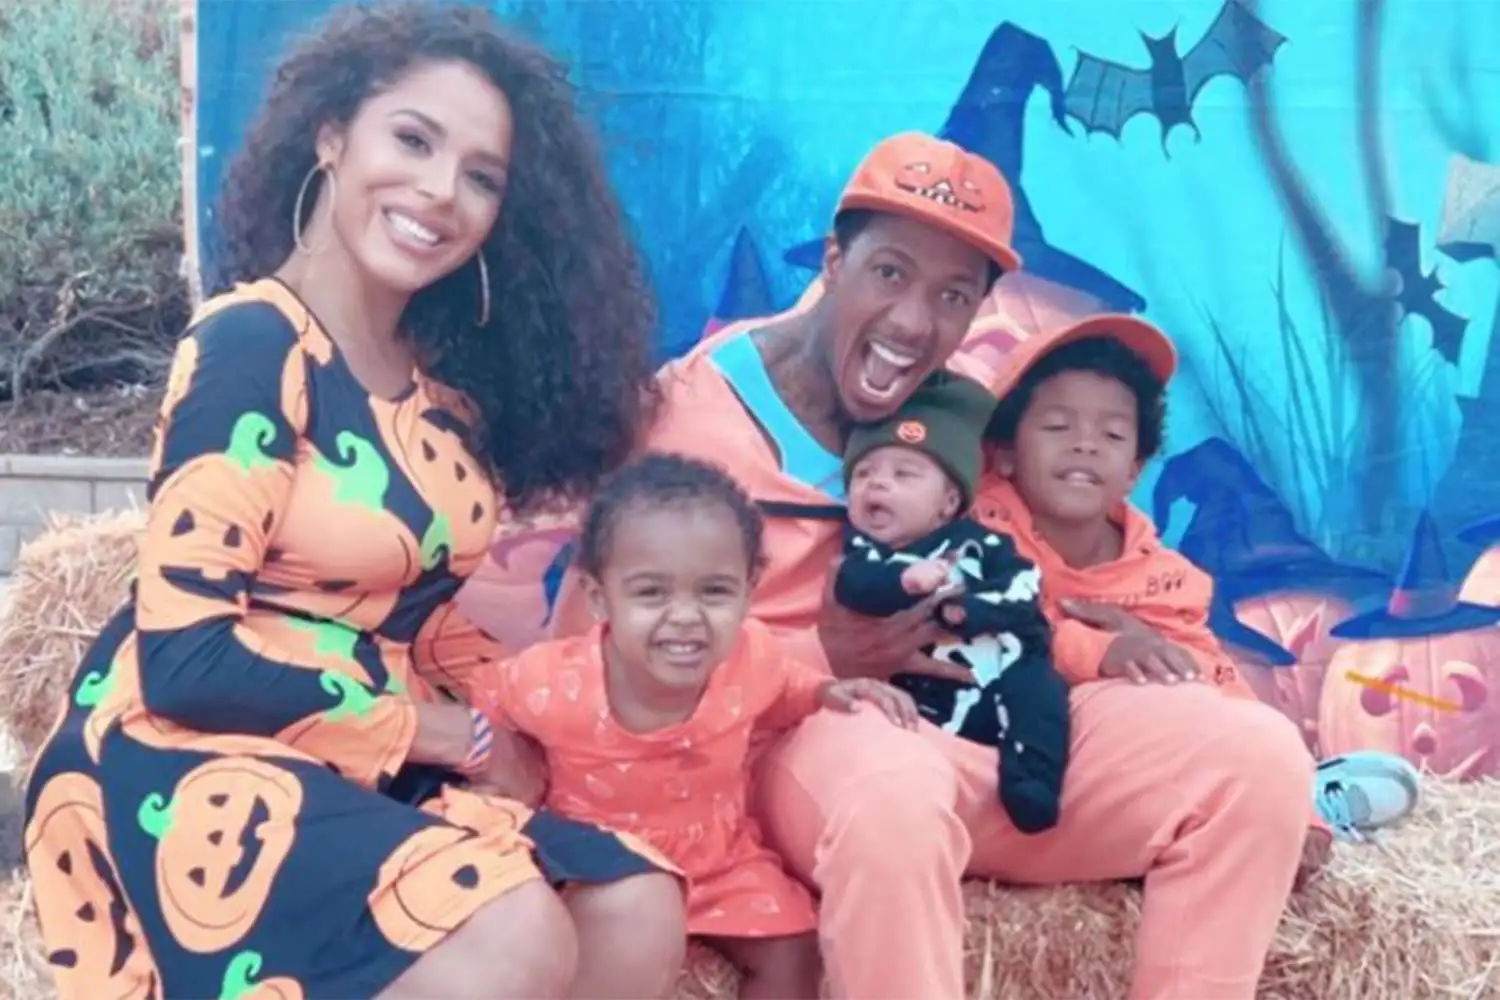 Nick Cannon, Brittany bell